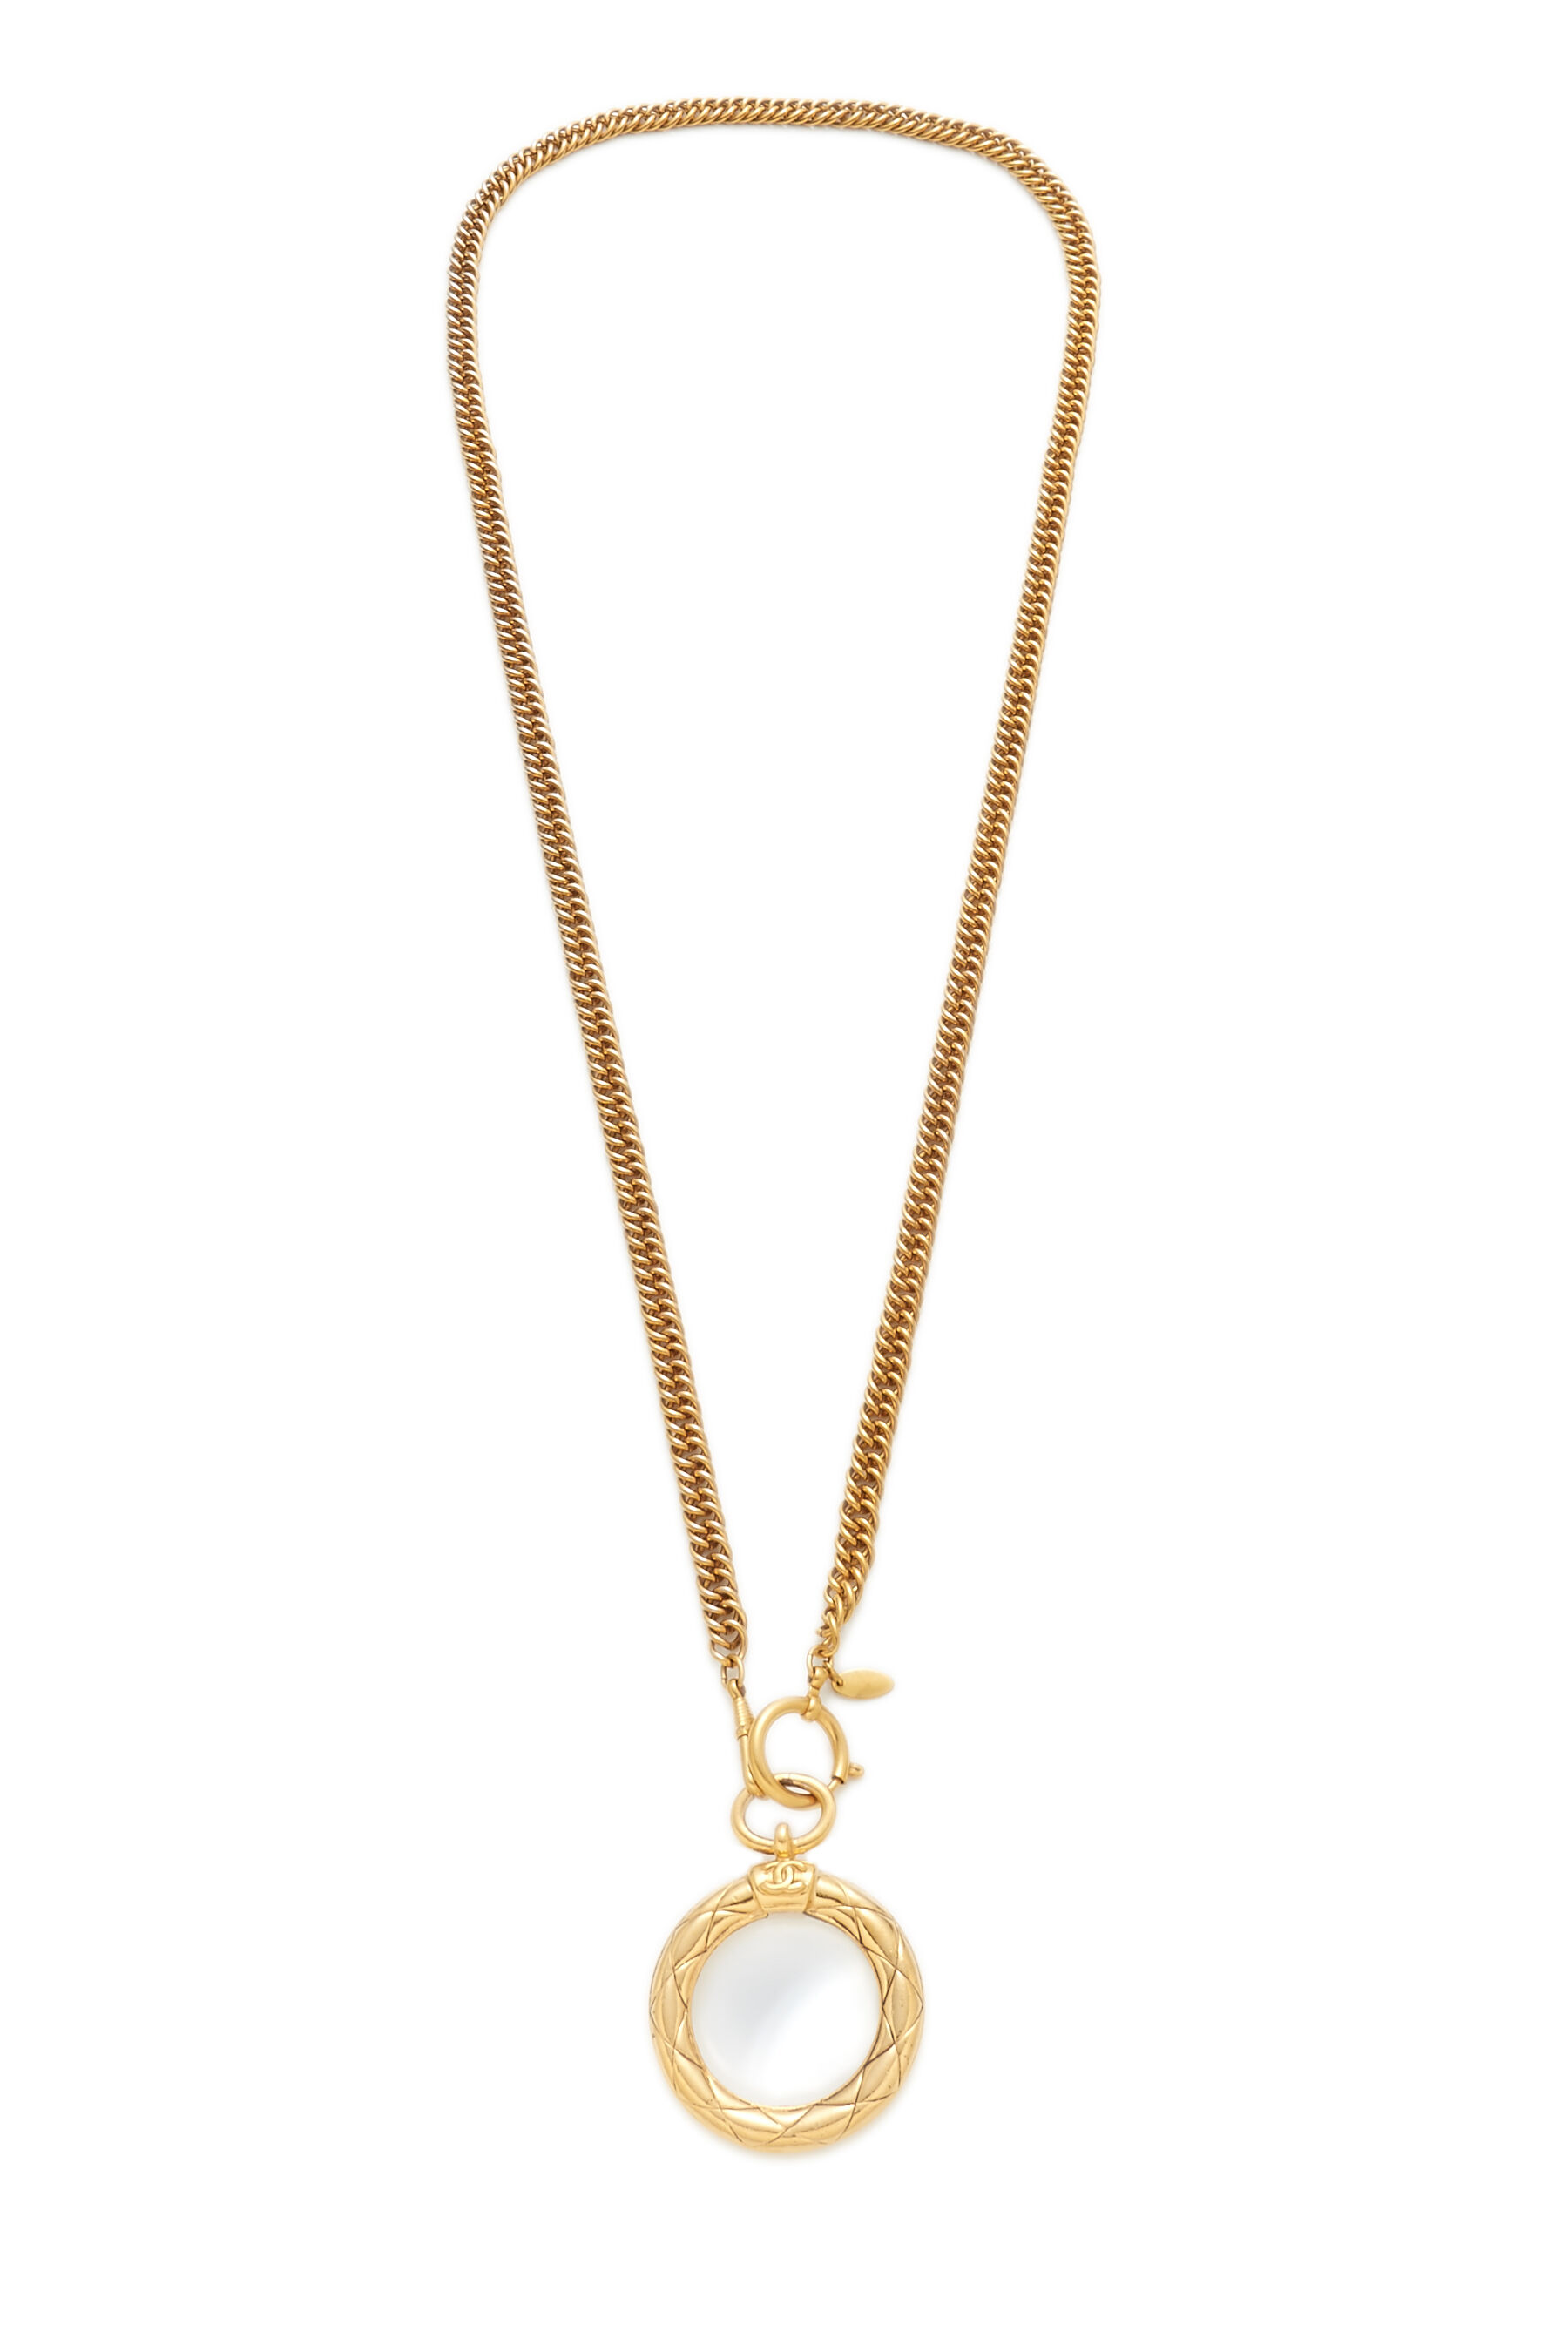 Chanel - Gold 'CC' Loupe Necklace